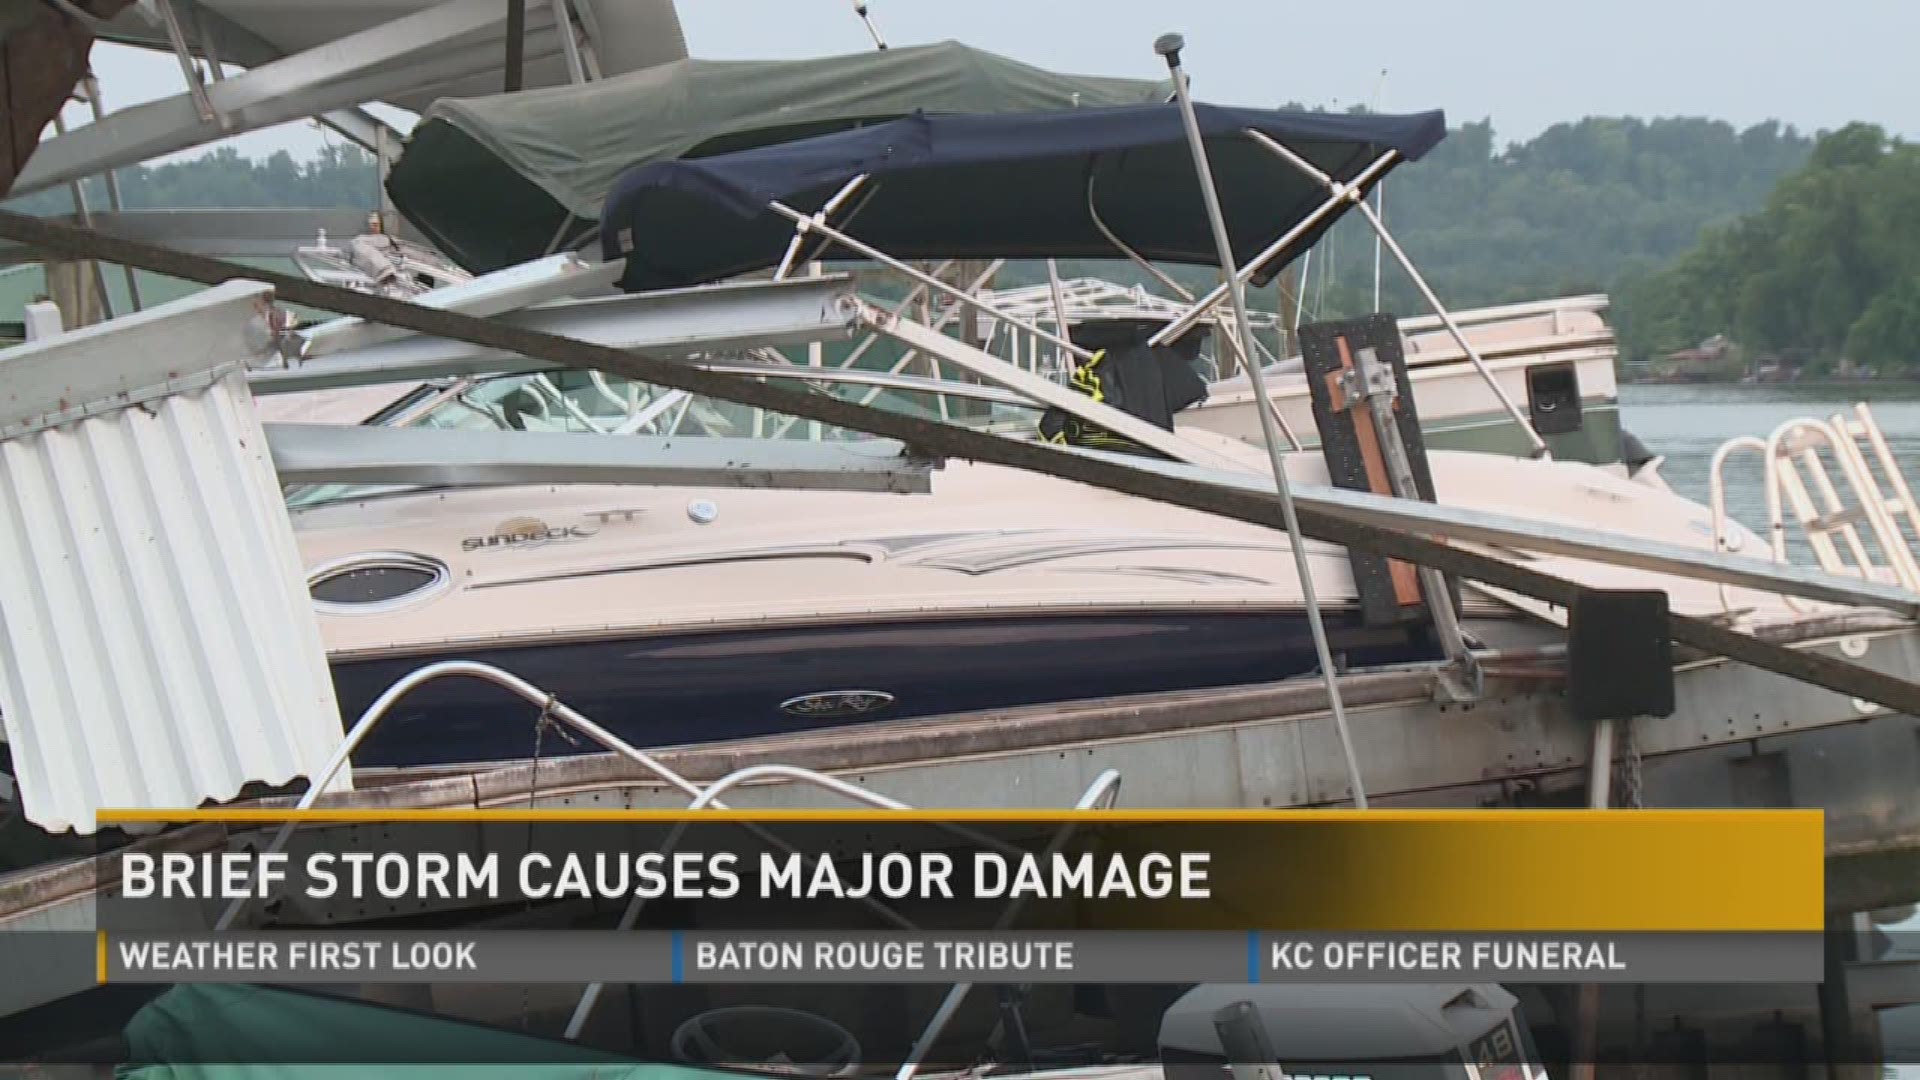 Winds from a pop-up storm causes severe damage to a dock club house in East TN